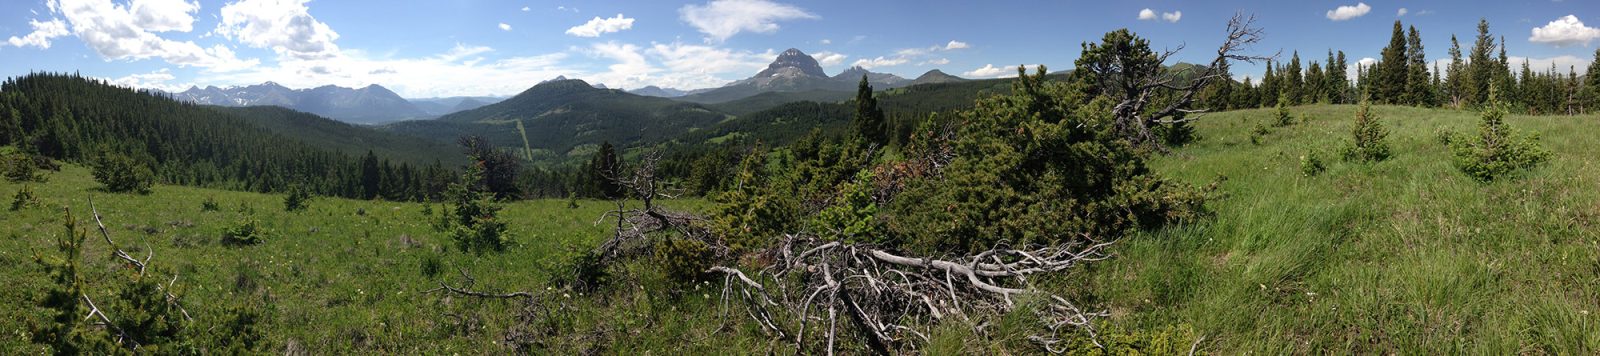 Crowsnest Mountain and the 7 Sisters